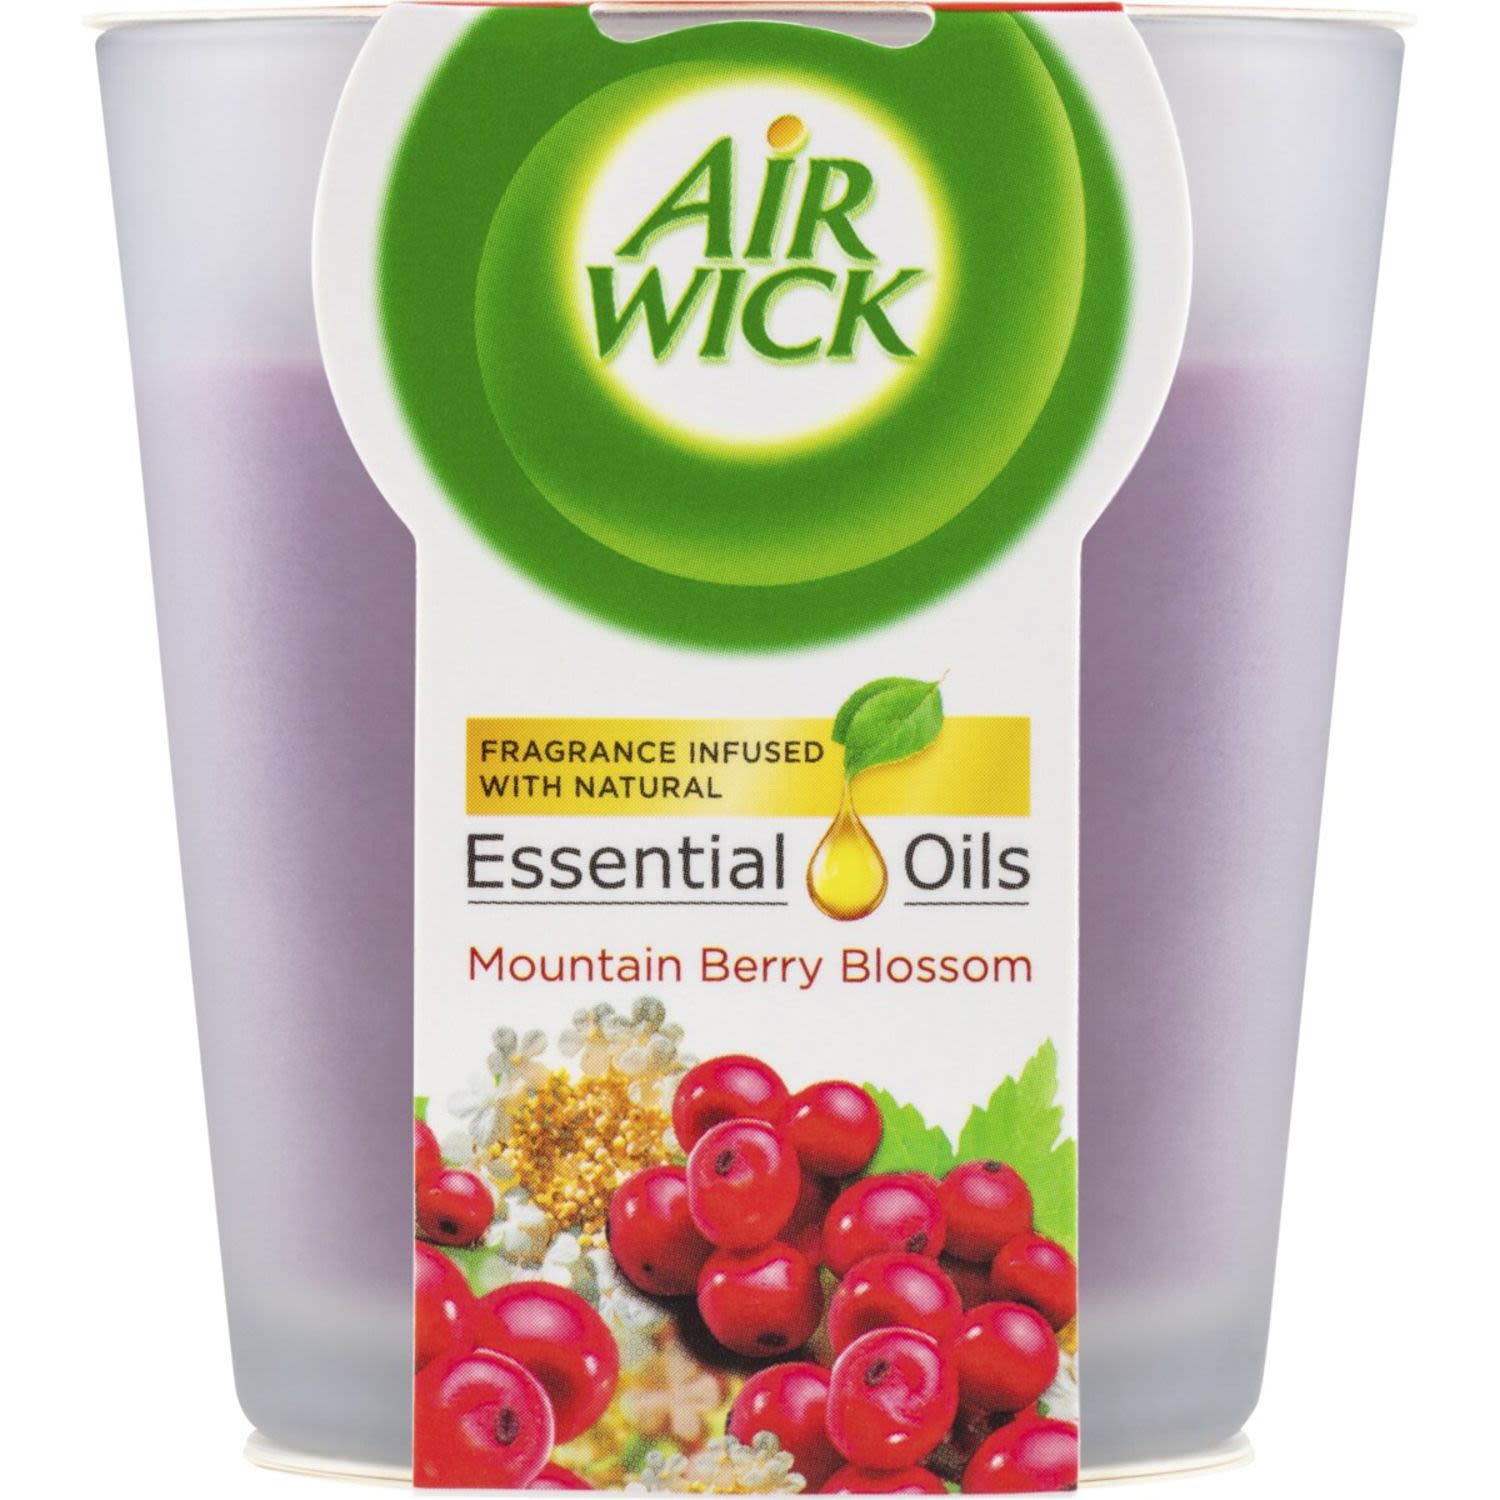 Air Wick Essential Oil Candle Mountain Berry Blossom, 105 Gram